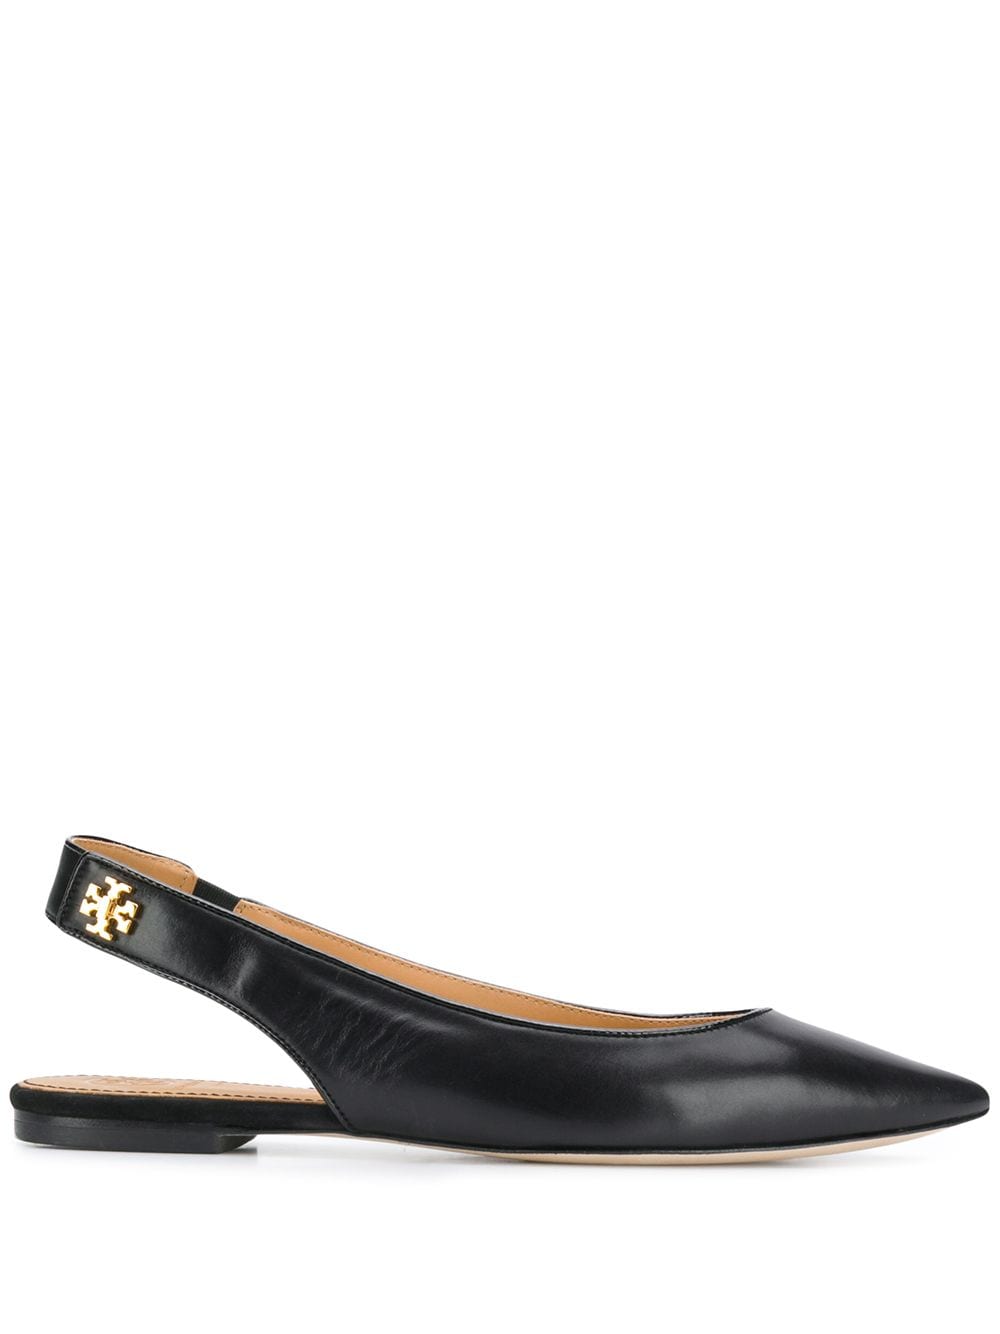 Shop black Tory Burch Kira slingback ballerina shoes with Express Delivery  - Farfetch